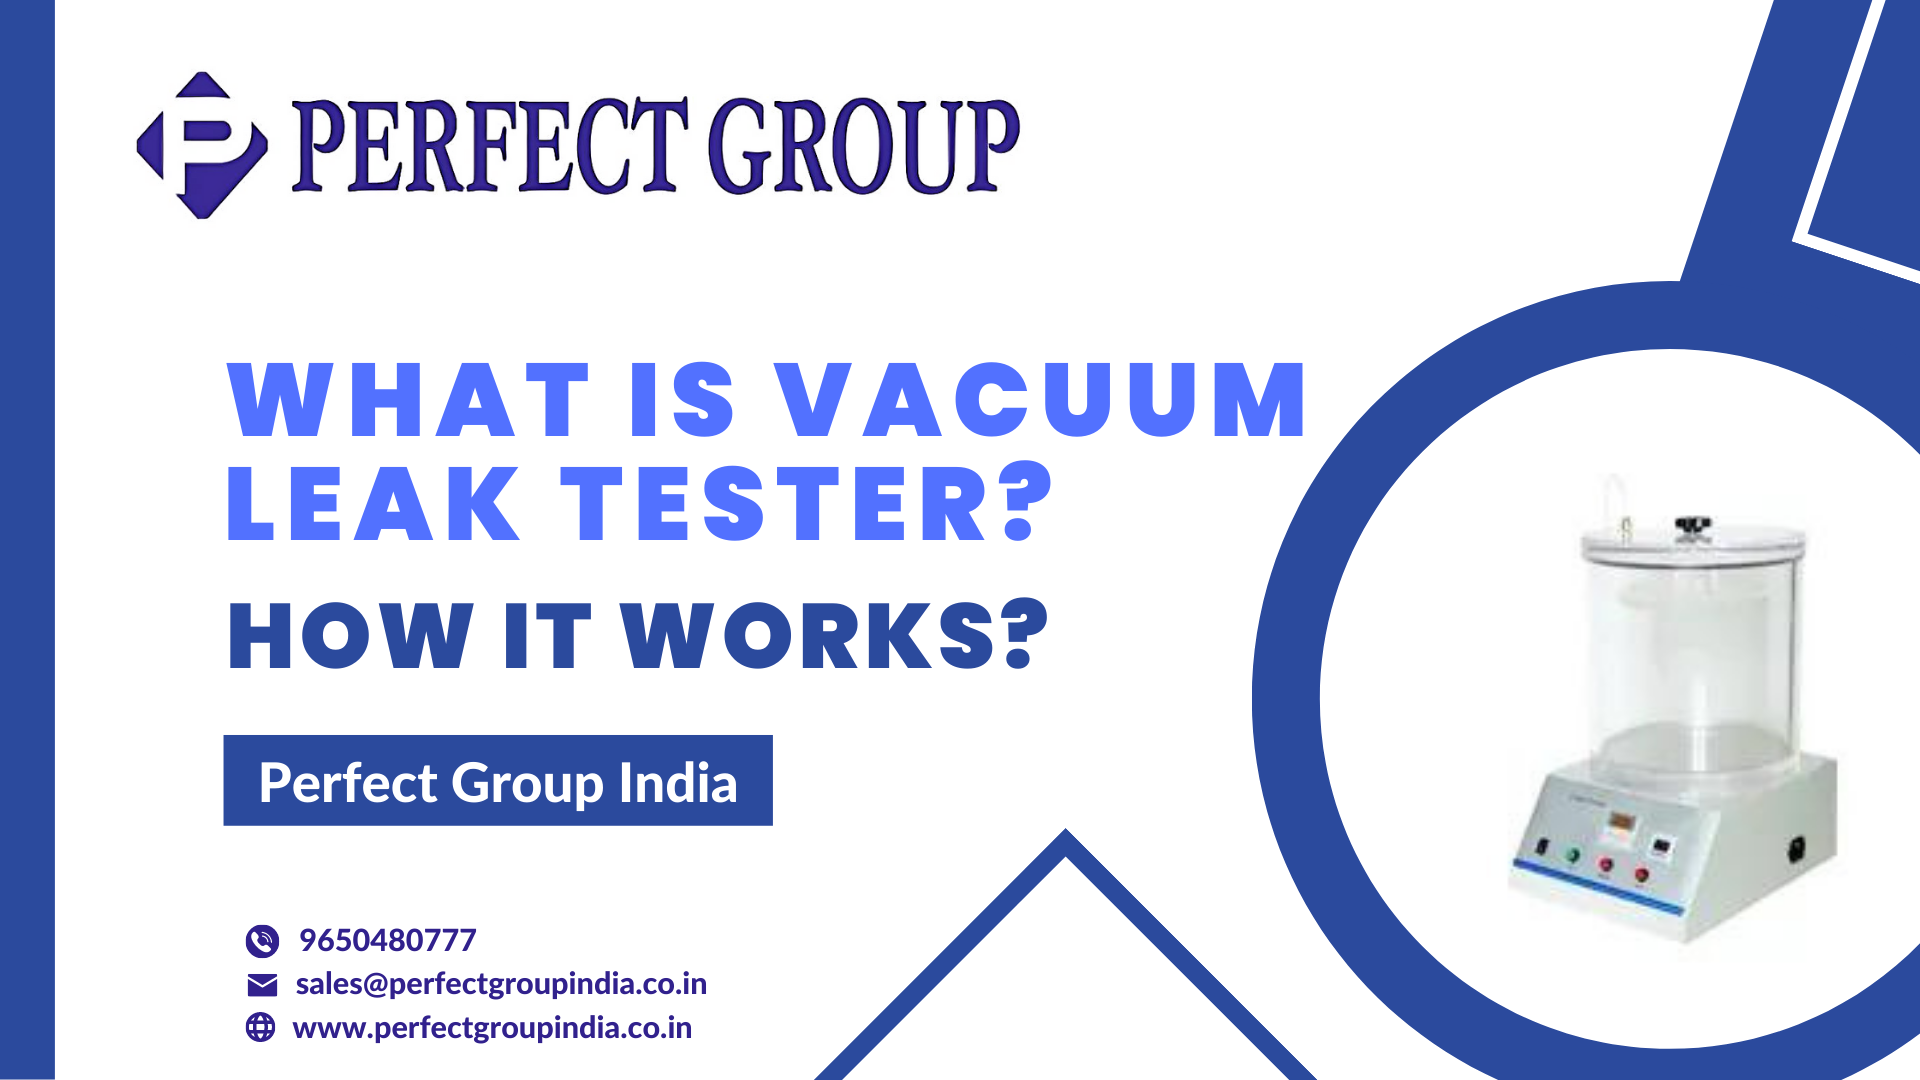 What is a Vacuum Leak Tester and How Does it Work?